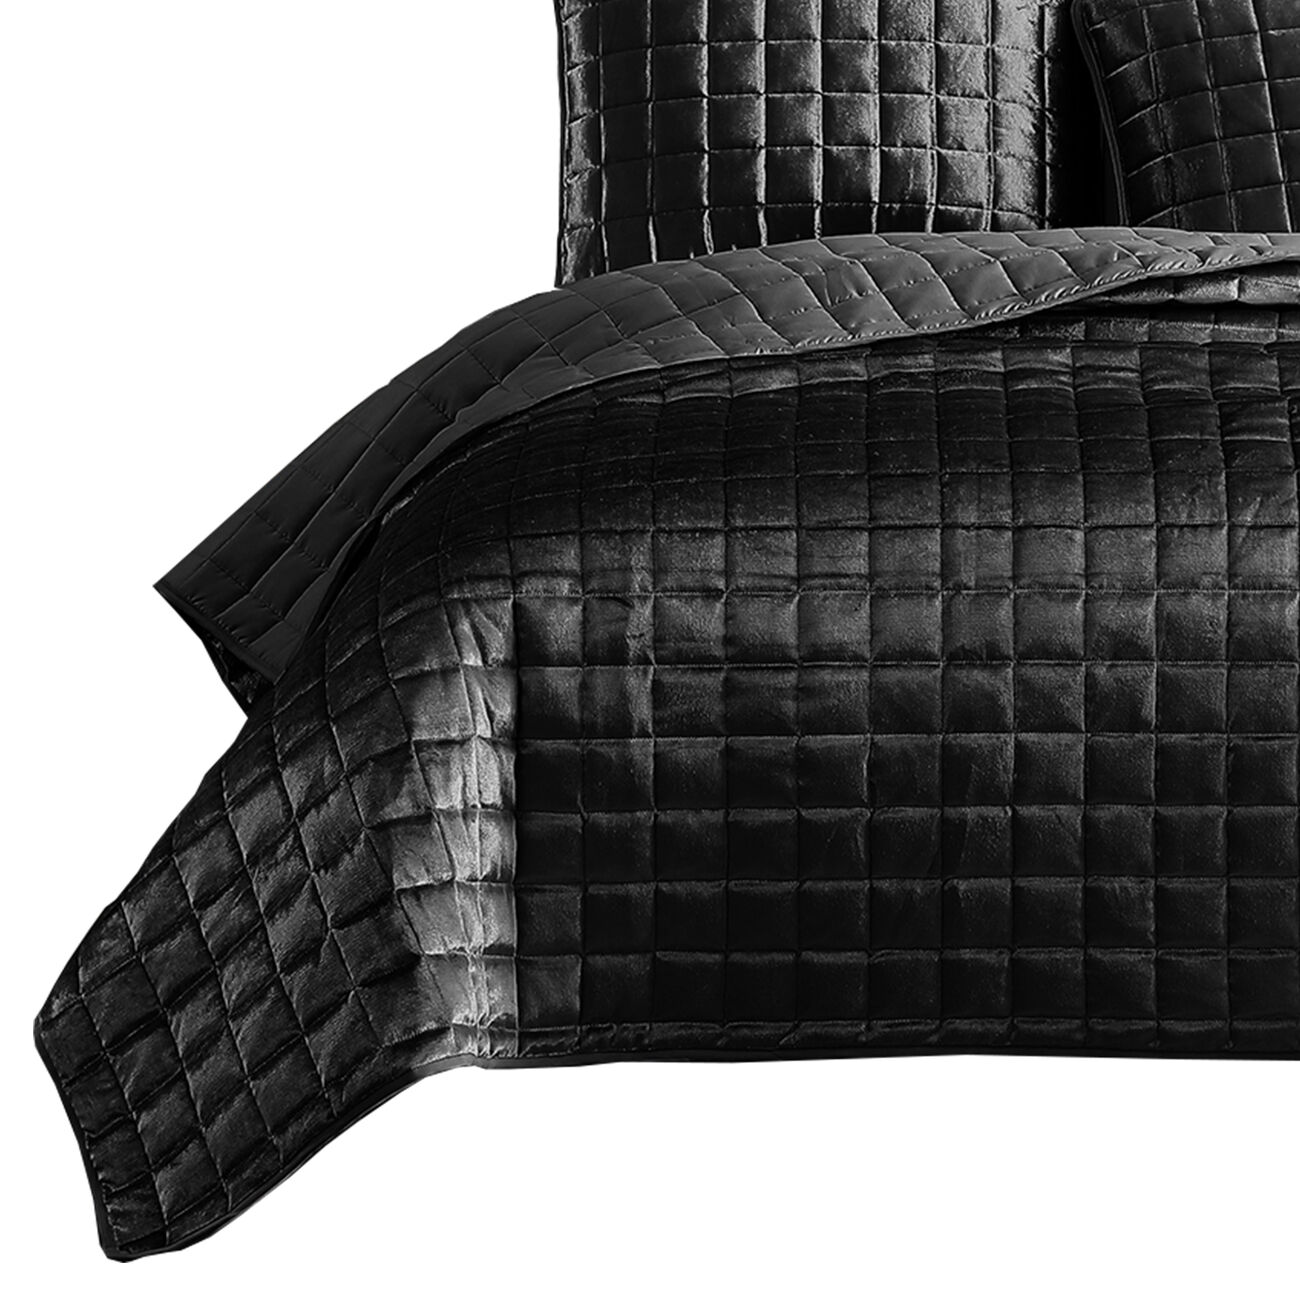 3 Piece King Size Coverlet Set with Stitched Square Pattern, Dark Gray